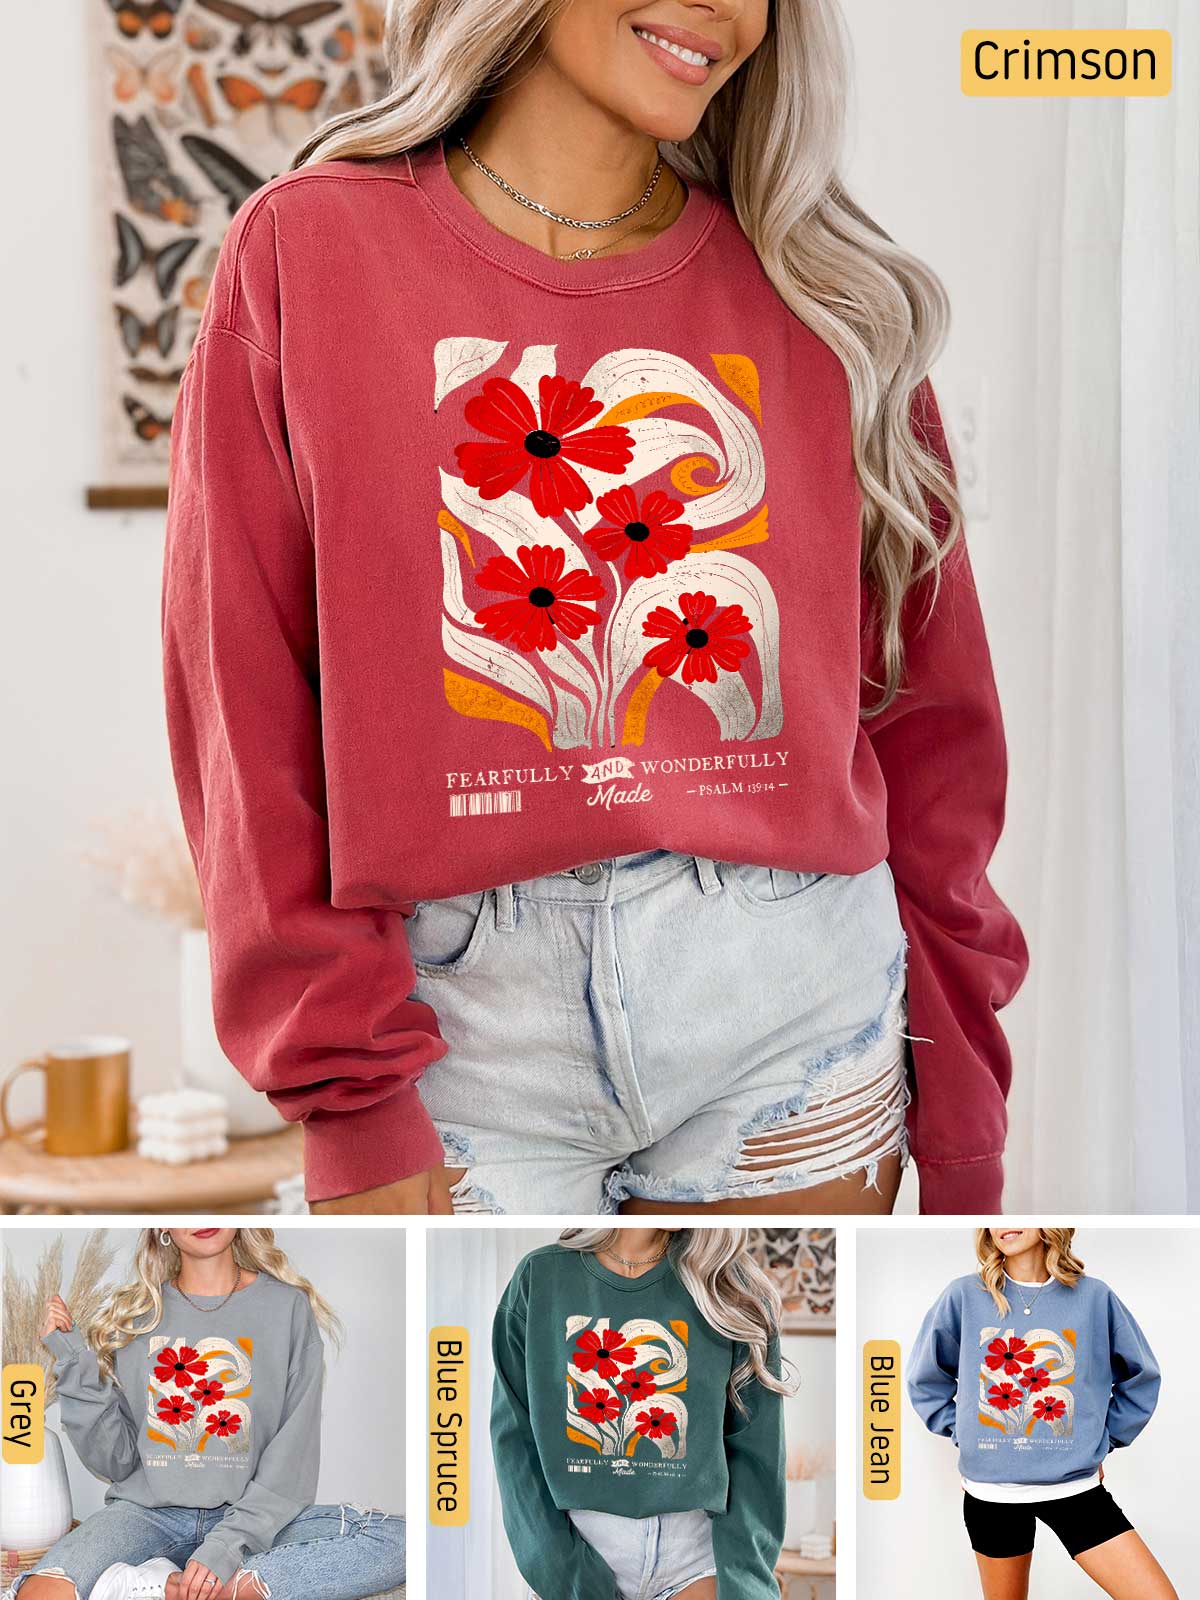 a woman wearing a red sweater with flowers on it